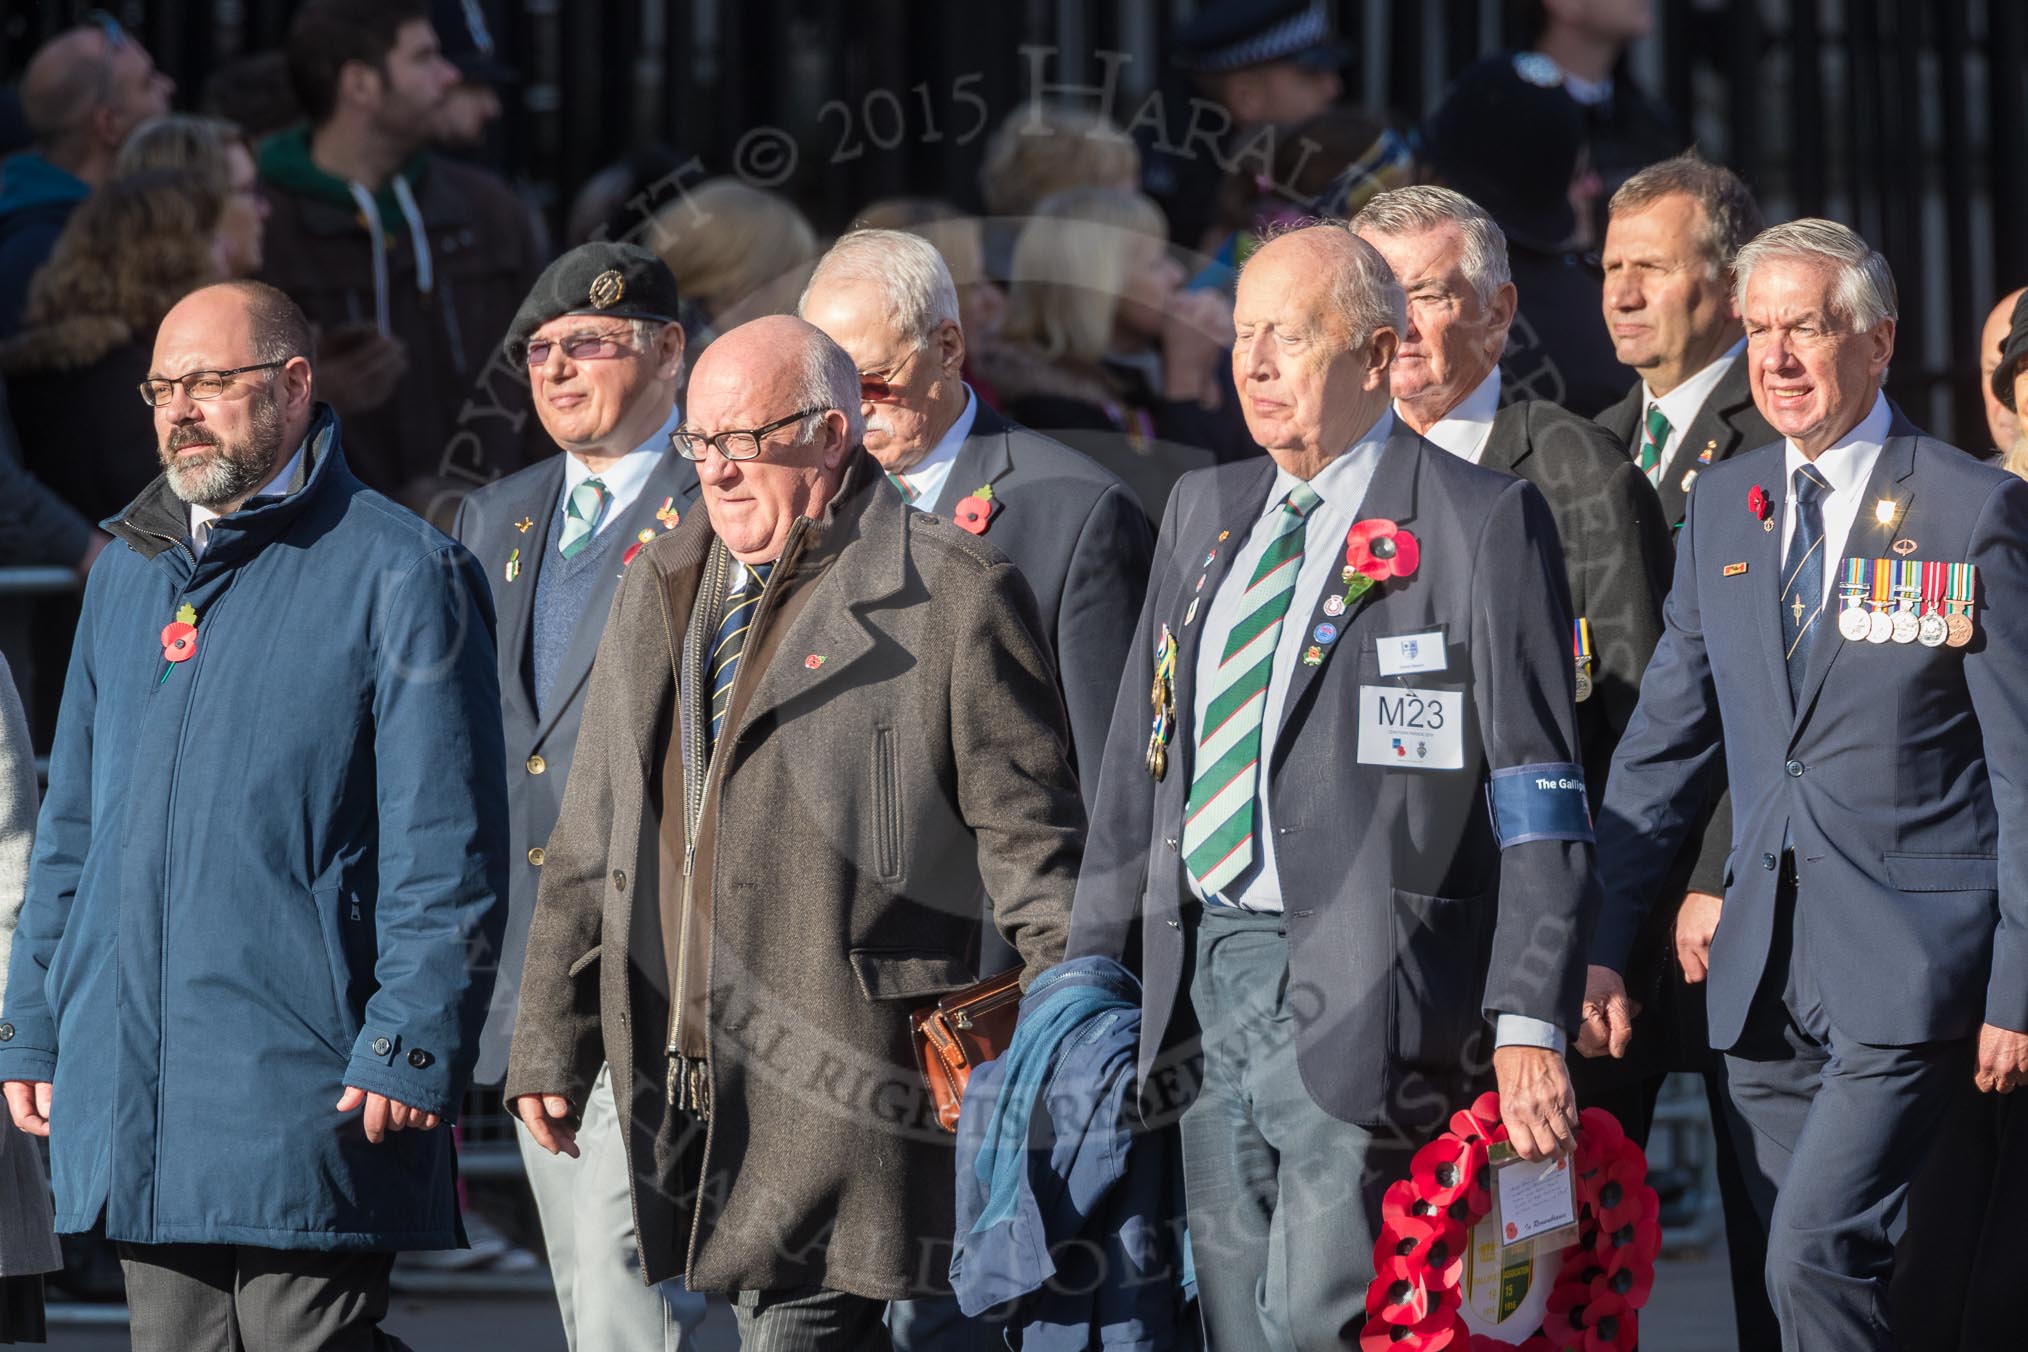 March Past, Remembrance Sunday at the Cenotaph 2016: M23 Gallipoli Association.
Cenotaph, Whitehall, London SW1,
London,
Greater London,
United Kingdom,
on 13 November 2016 at 13:16, image #2691